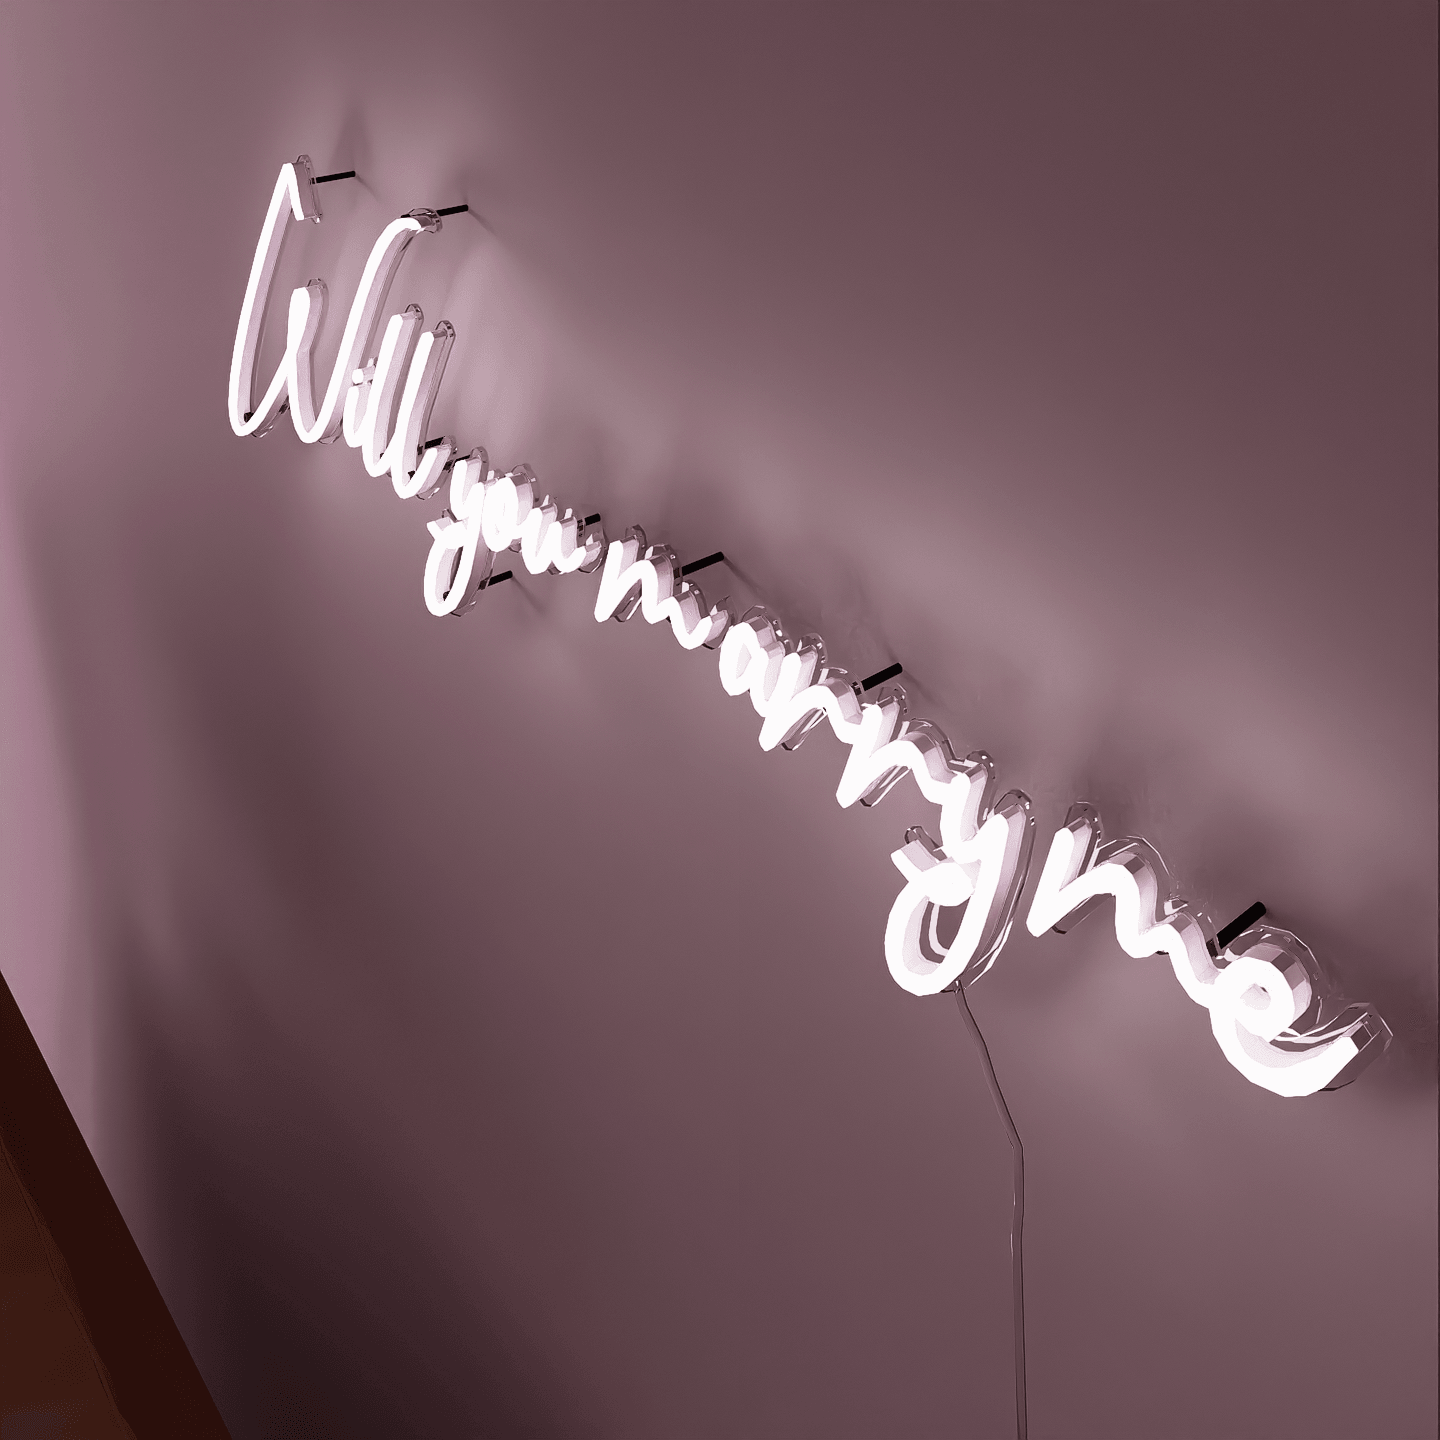 oblique-shot-of-lit-white-neon-lights-hanging-on-the-wall-will-you-marry-me